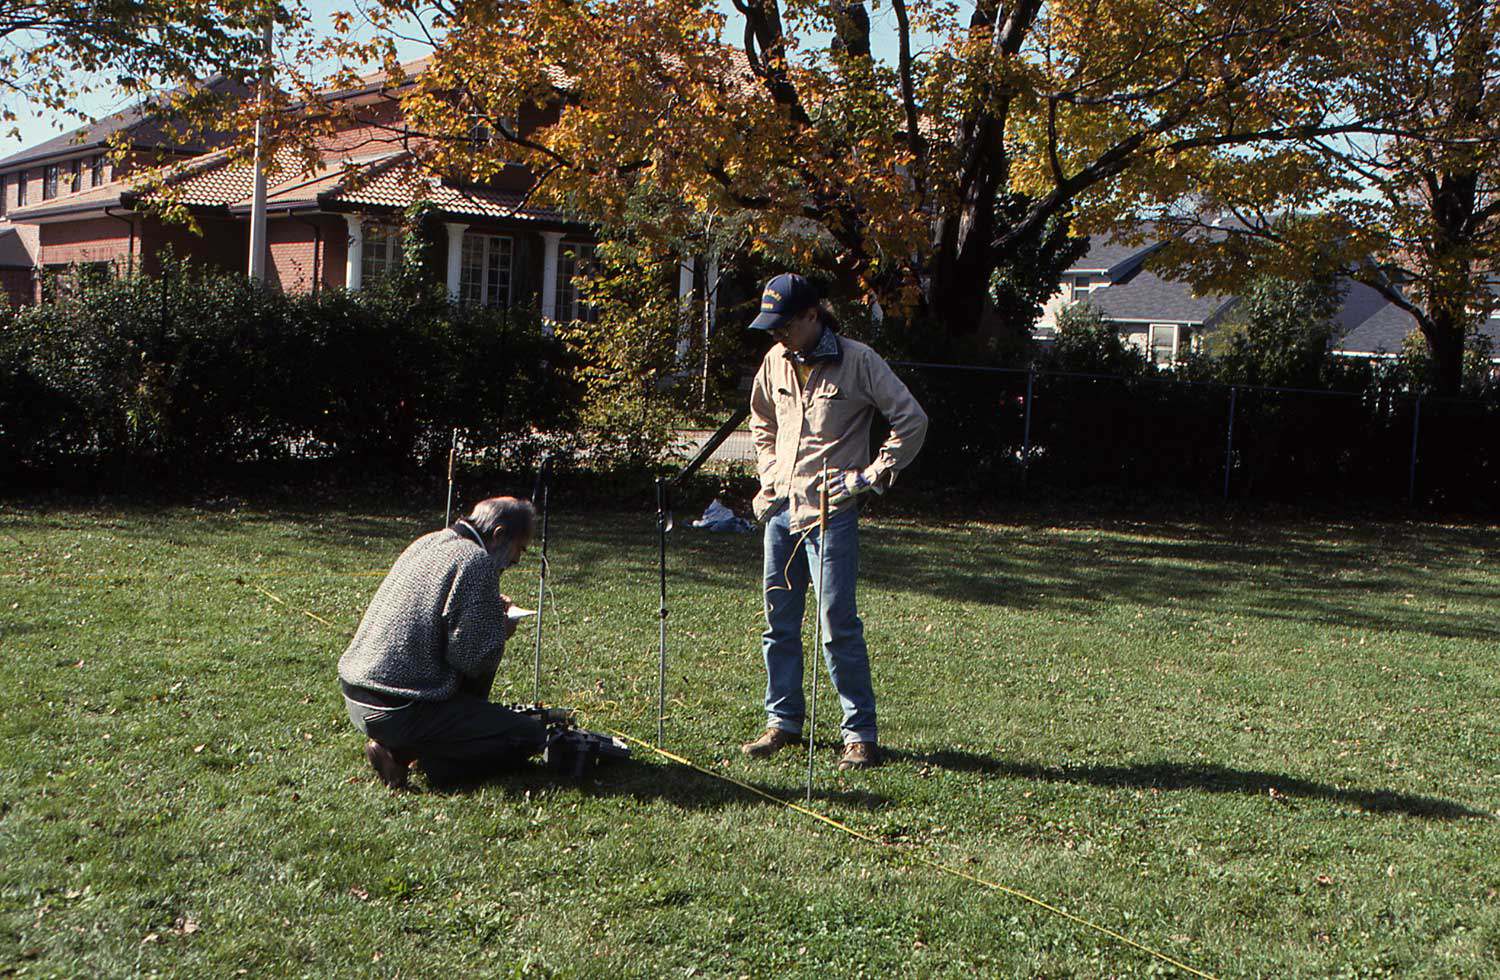 Several geophysical methods were used at the Trust’s Chedoke Estate in Hamilton, including resistivity (shown in photo), magnetometer and electromagnetic survey.